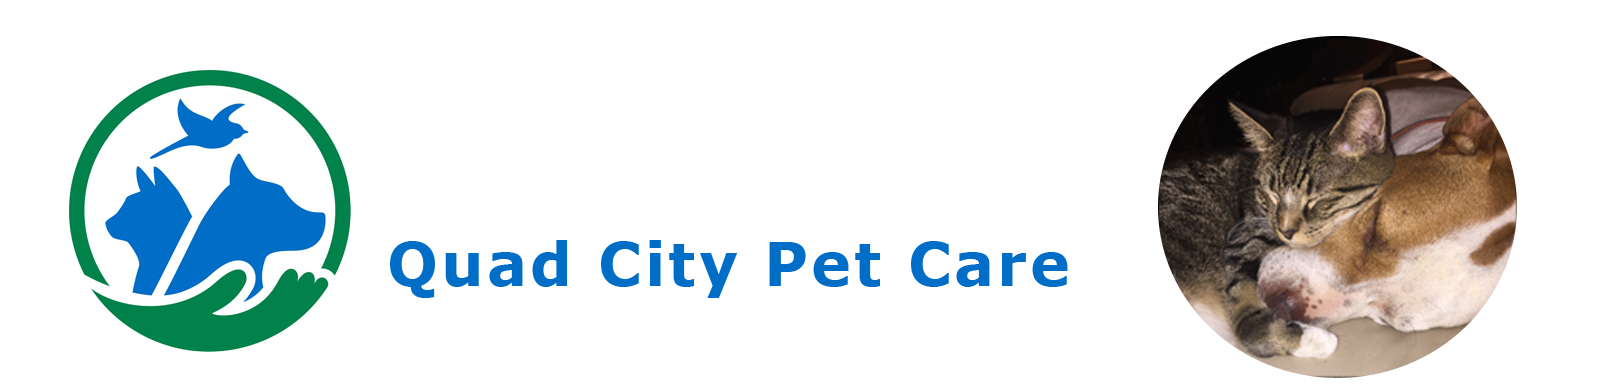 Banner graphic with a photo of a cute puppy, the QC Pet Care logo that shows a hand holding a dog, cat, and bird, and text that says Quad City Pet Care